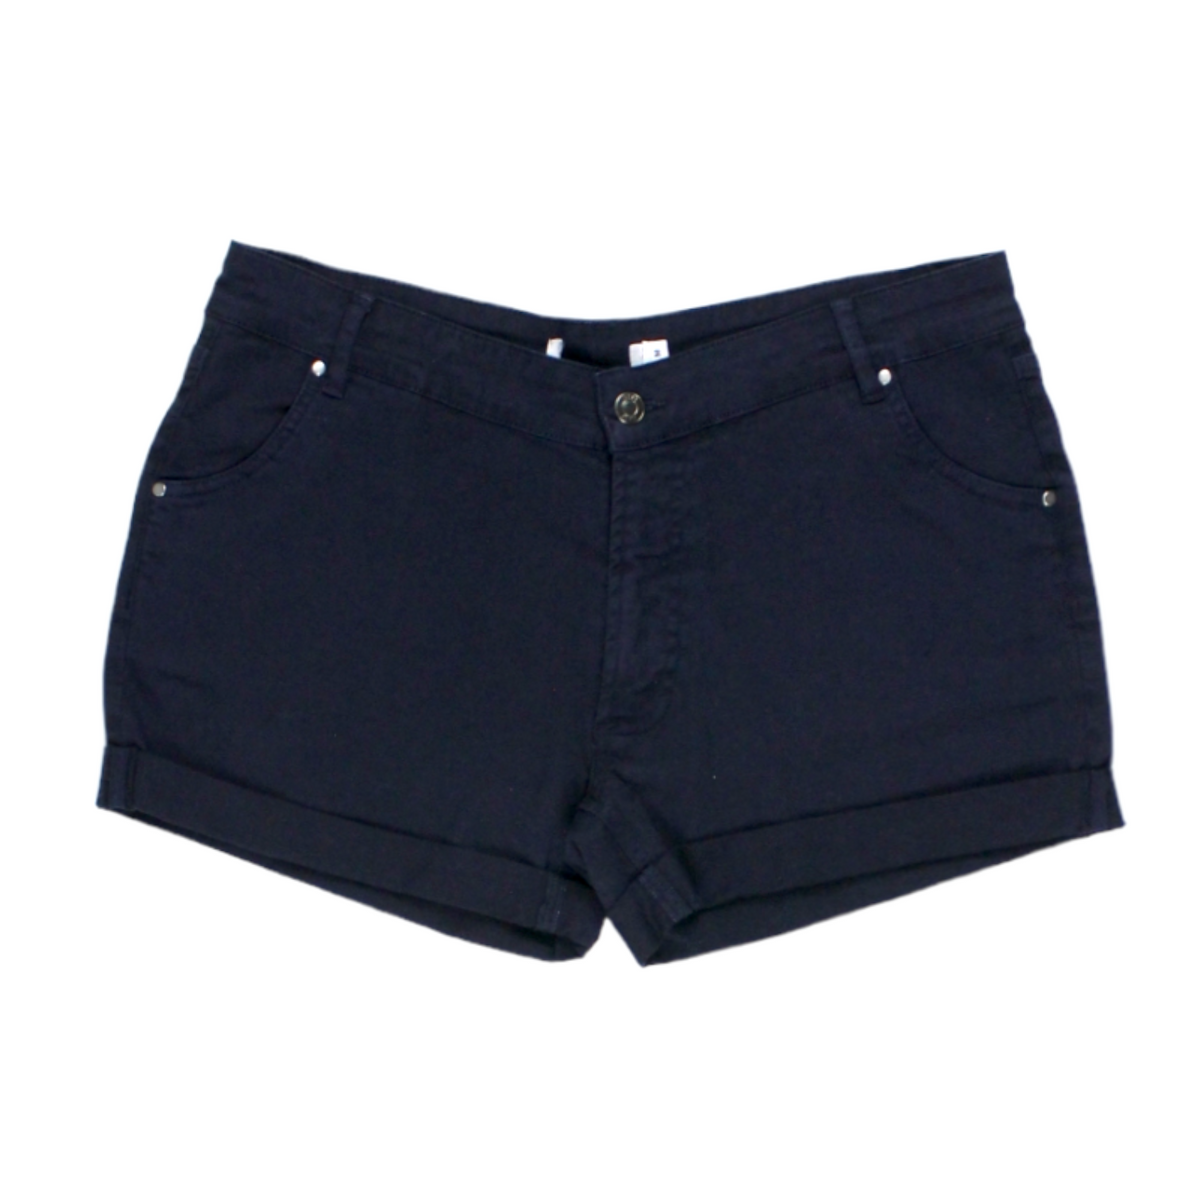 NRBY Navy Cotton Twill Shorts - Sample